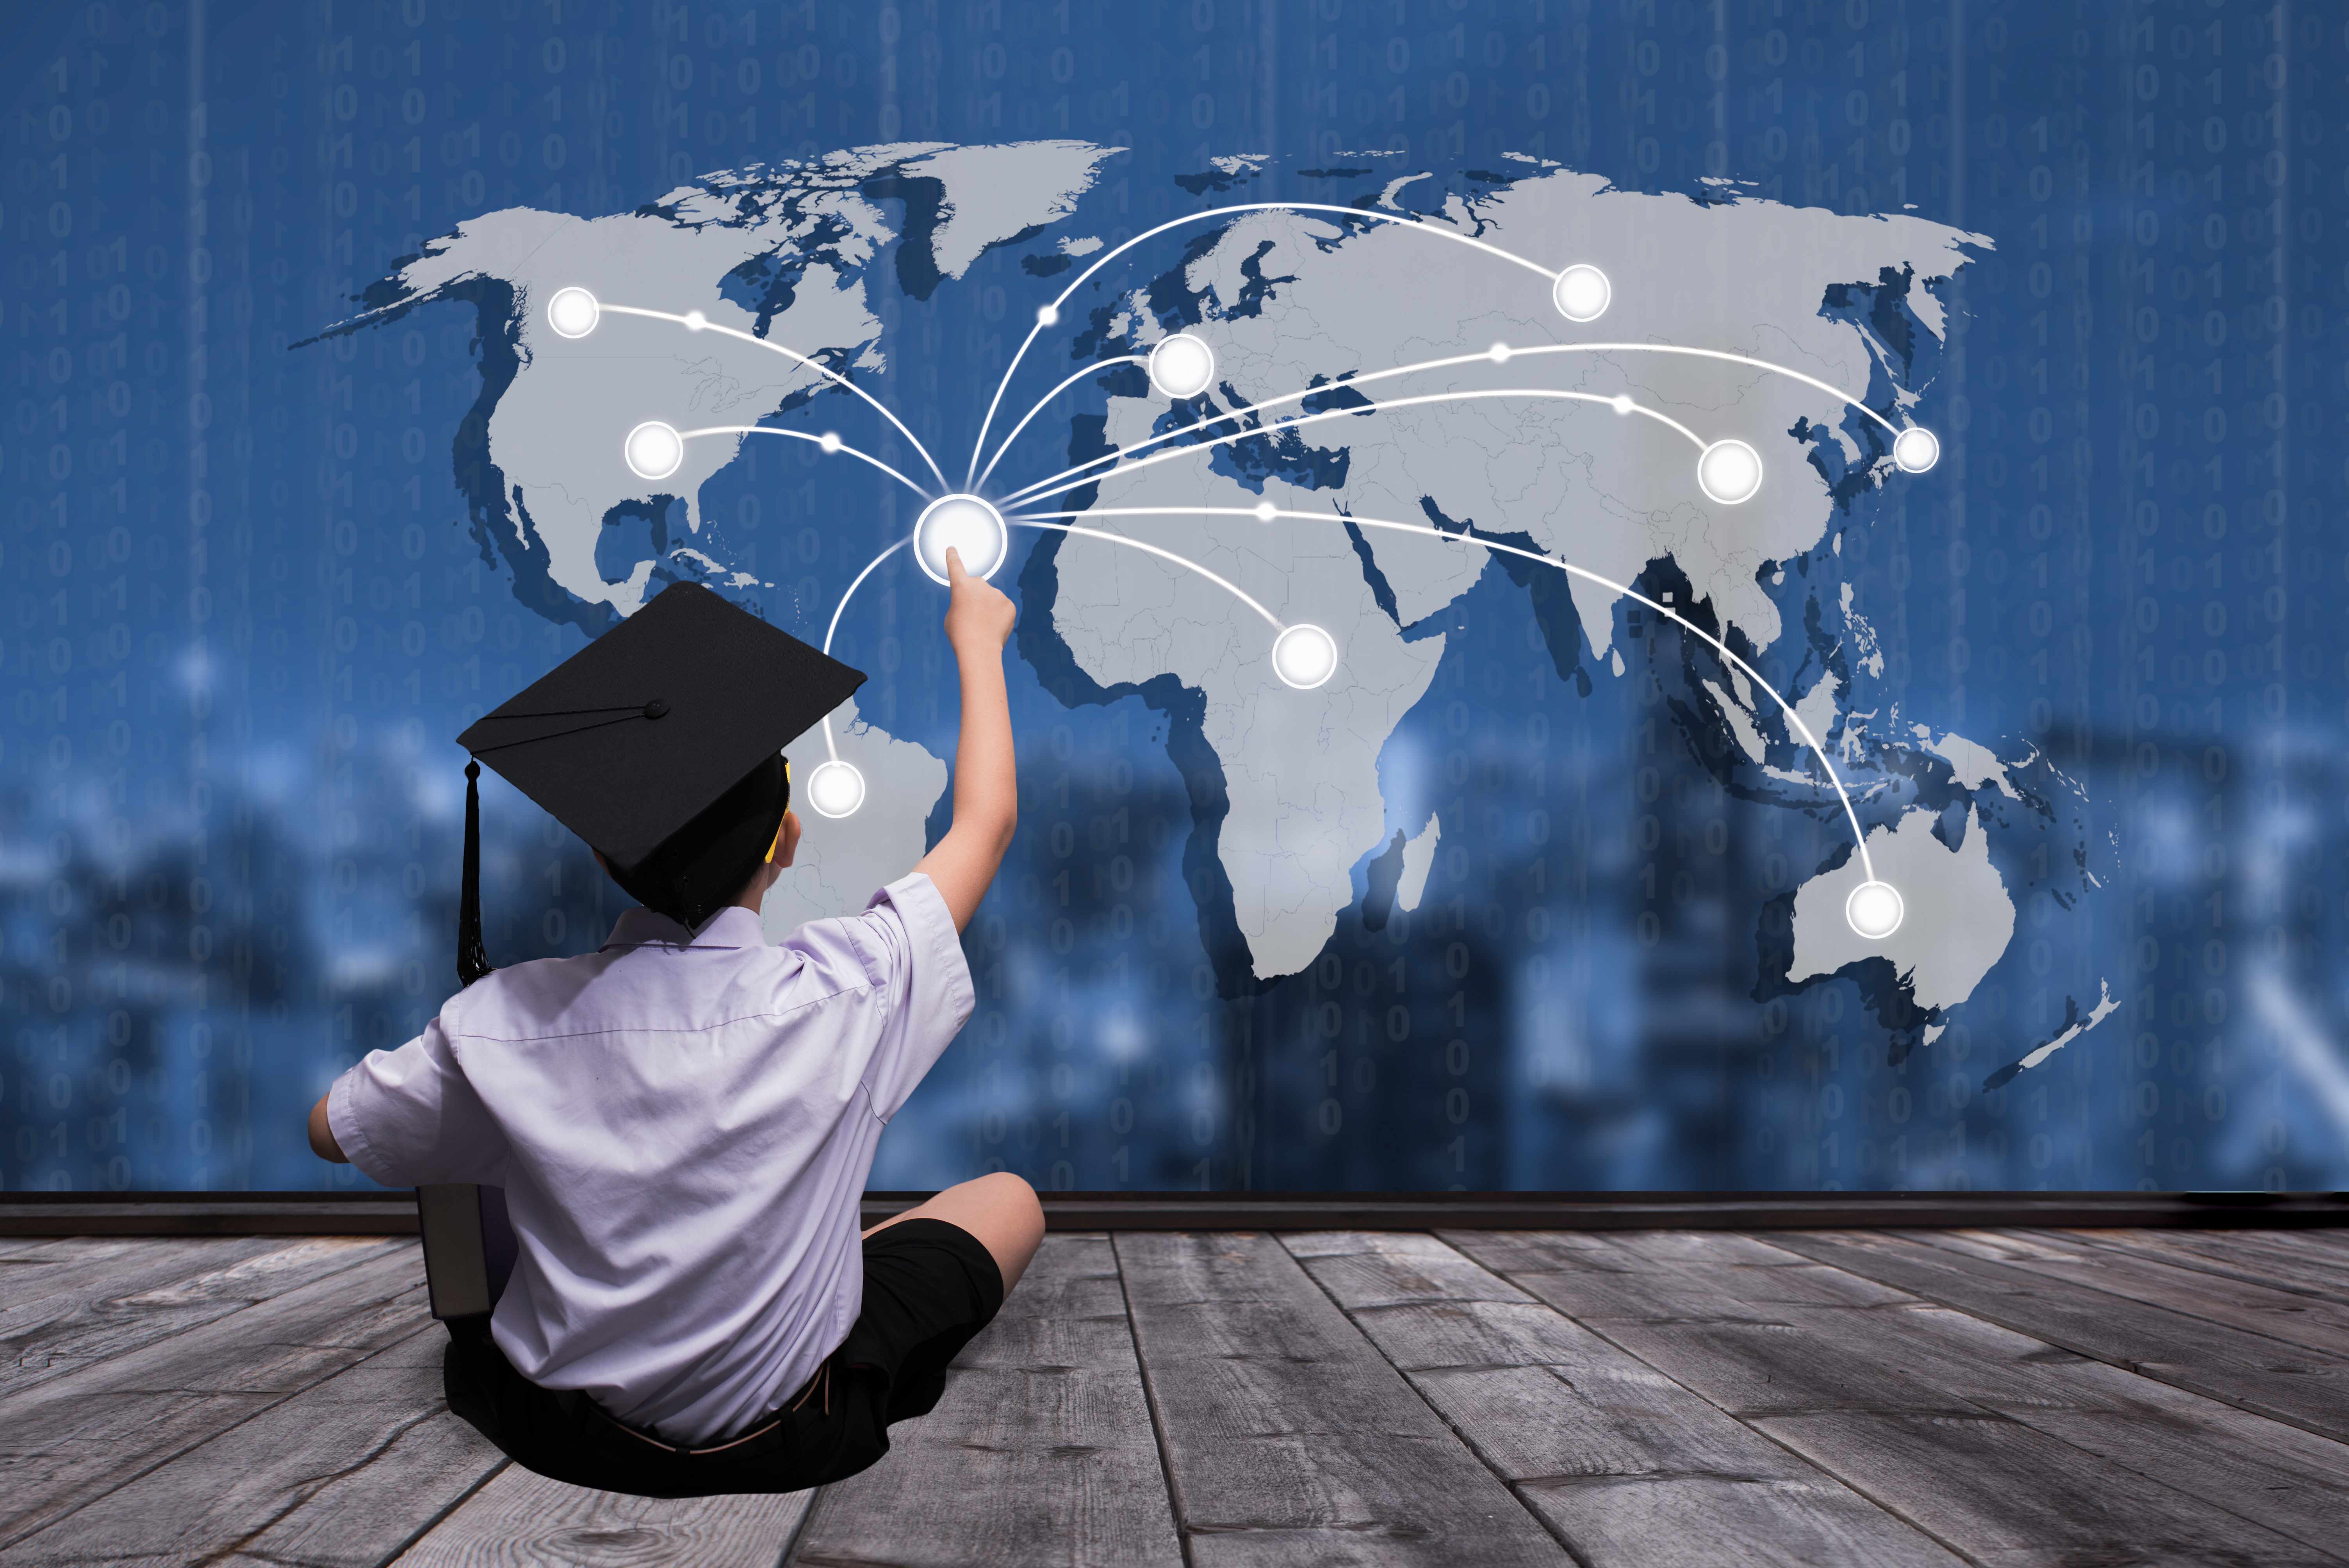 a young boy with a graduation cap sitting in front of a global map